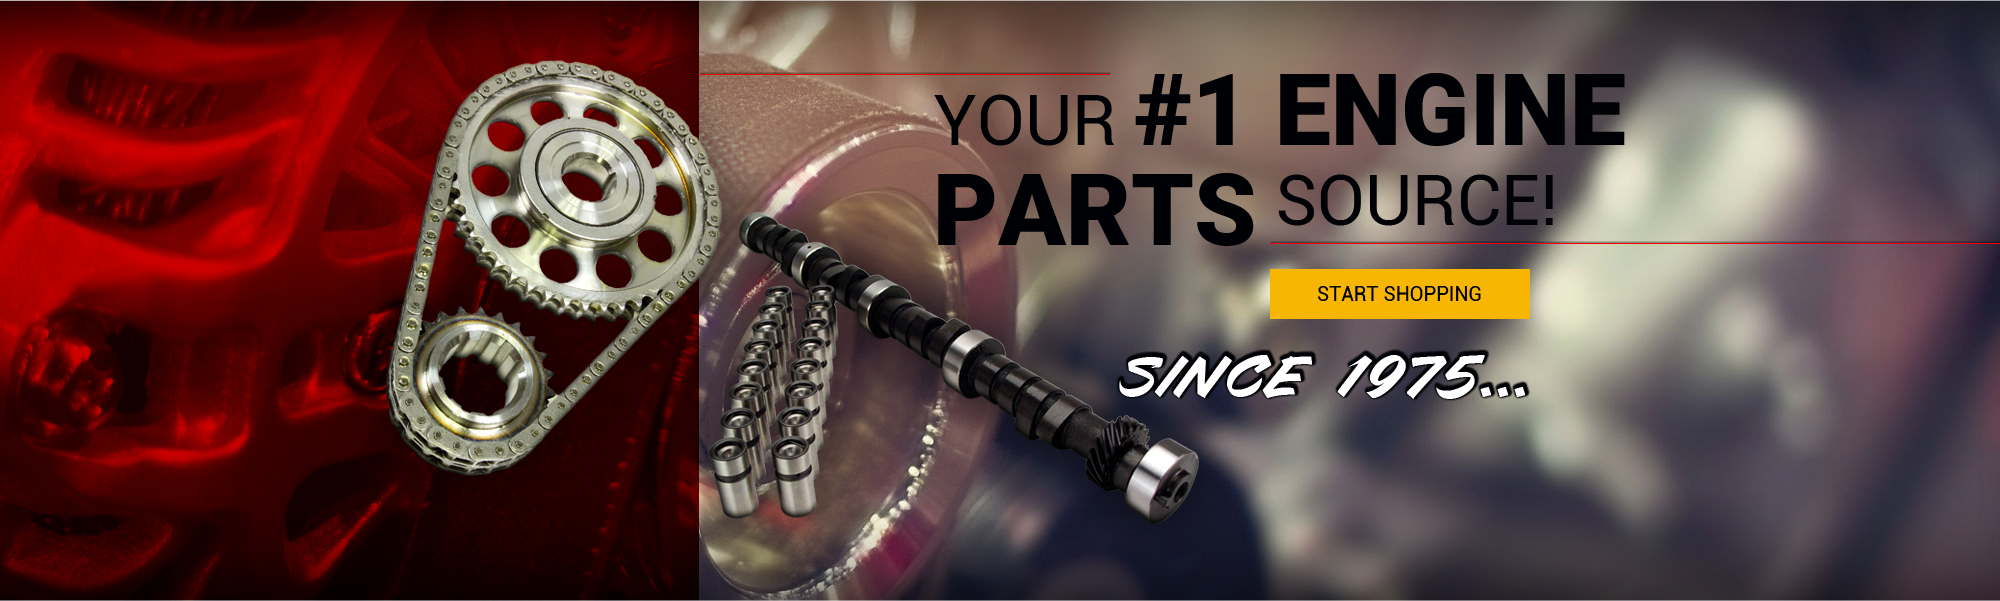 Your #1 Engine Parts Source! - Start Shopping